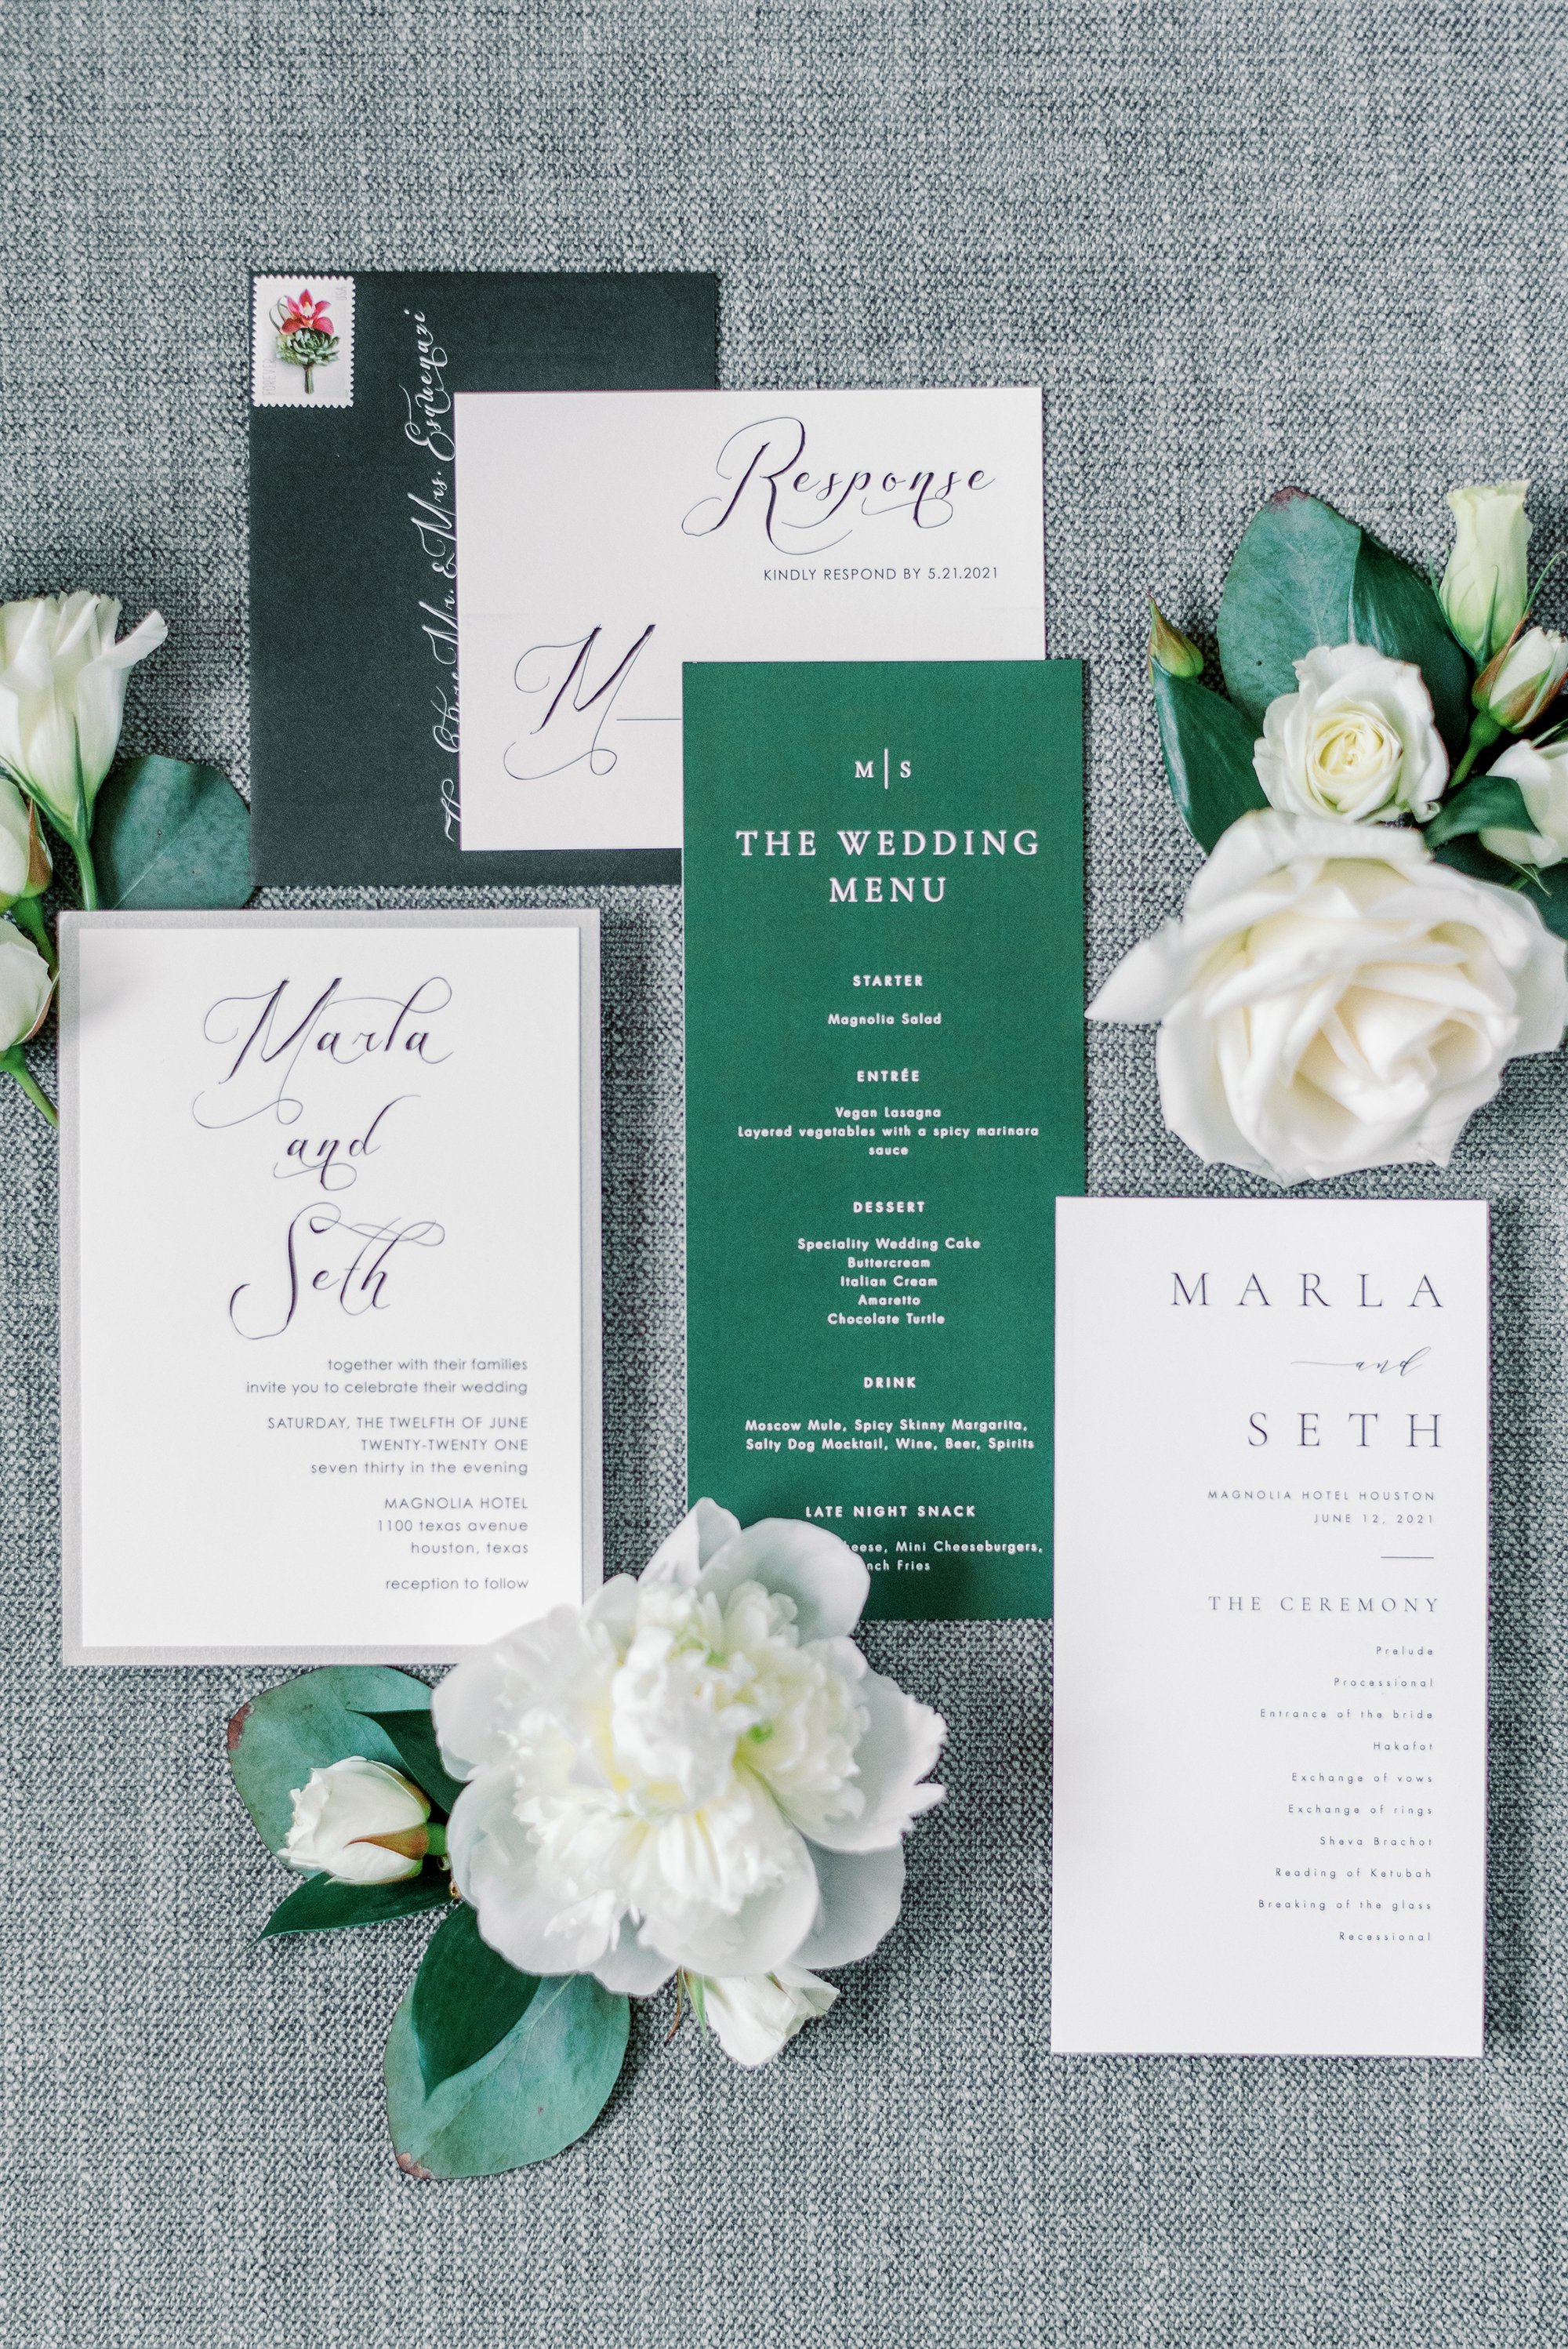 A photography flat lay with the bride and groom's wedding invitation, menu and envelope in green, black and white. The flat lay also has classic flowers bordering in including white peonies, white roses and Lisianthus. 